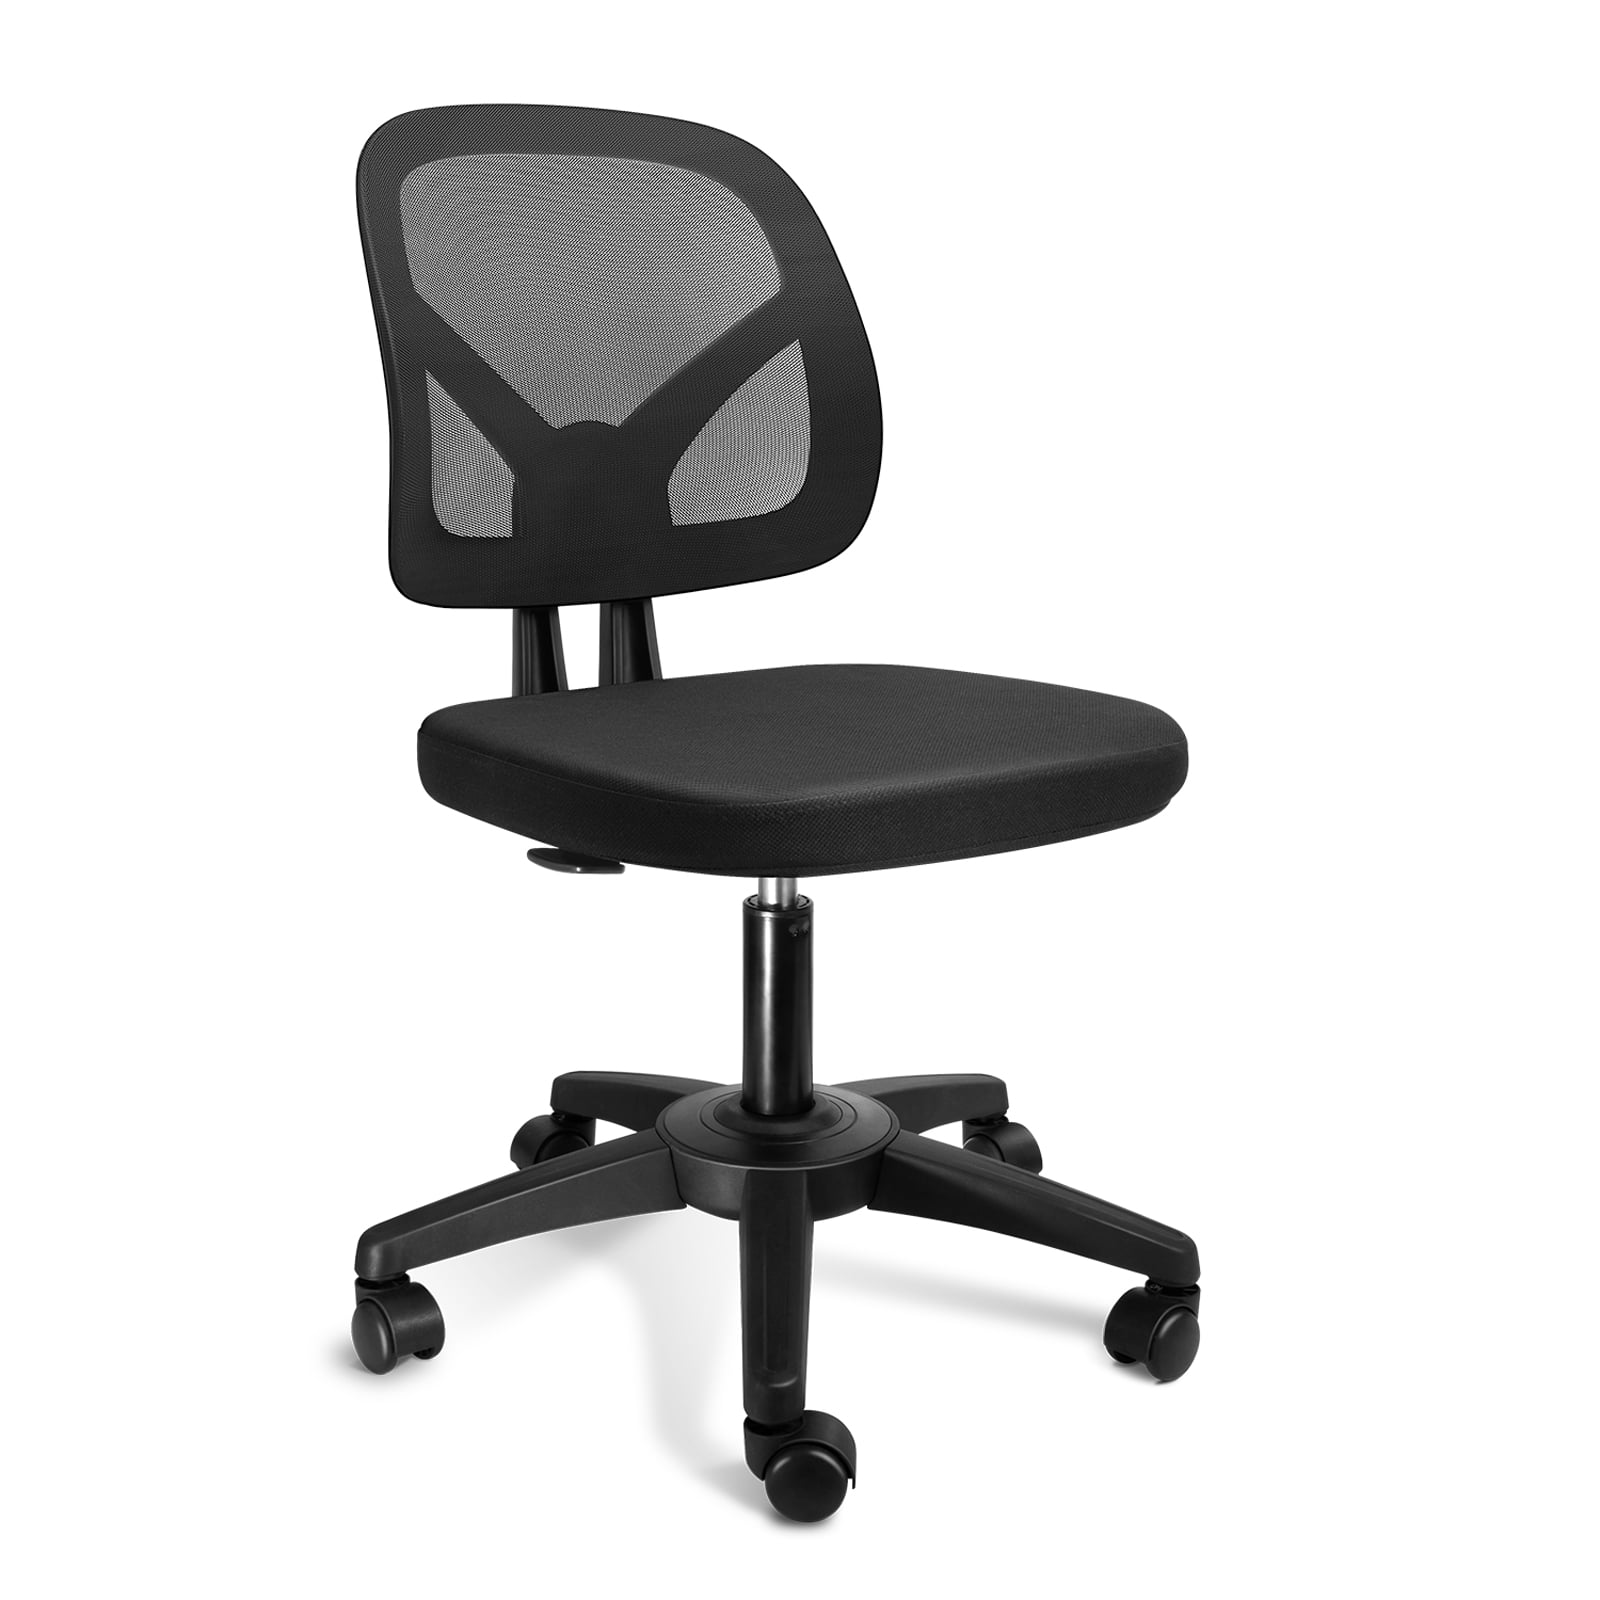 Armless Mesh Office Chair, Adjustable Computer Chair No